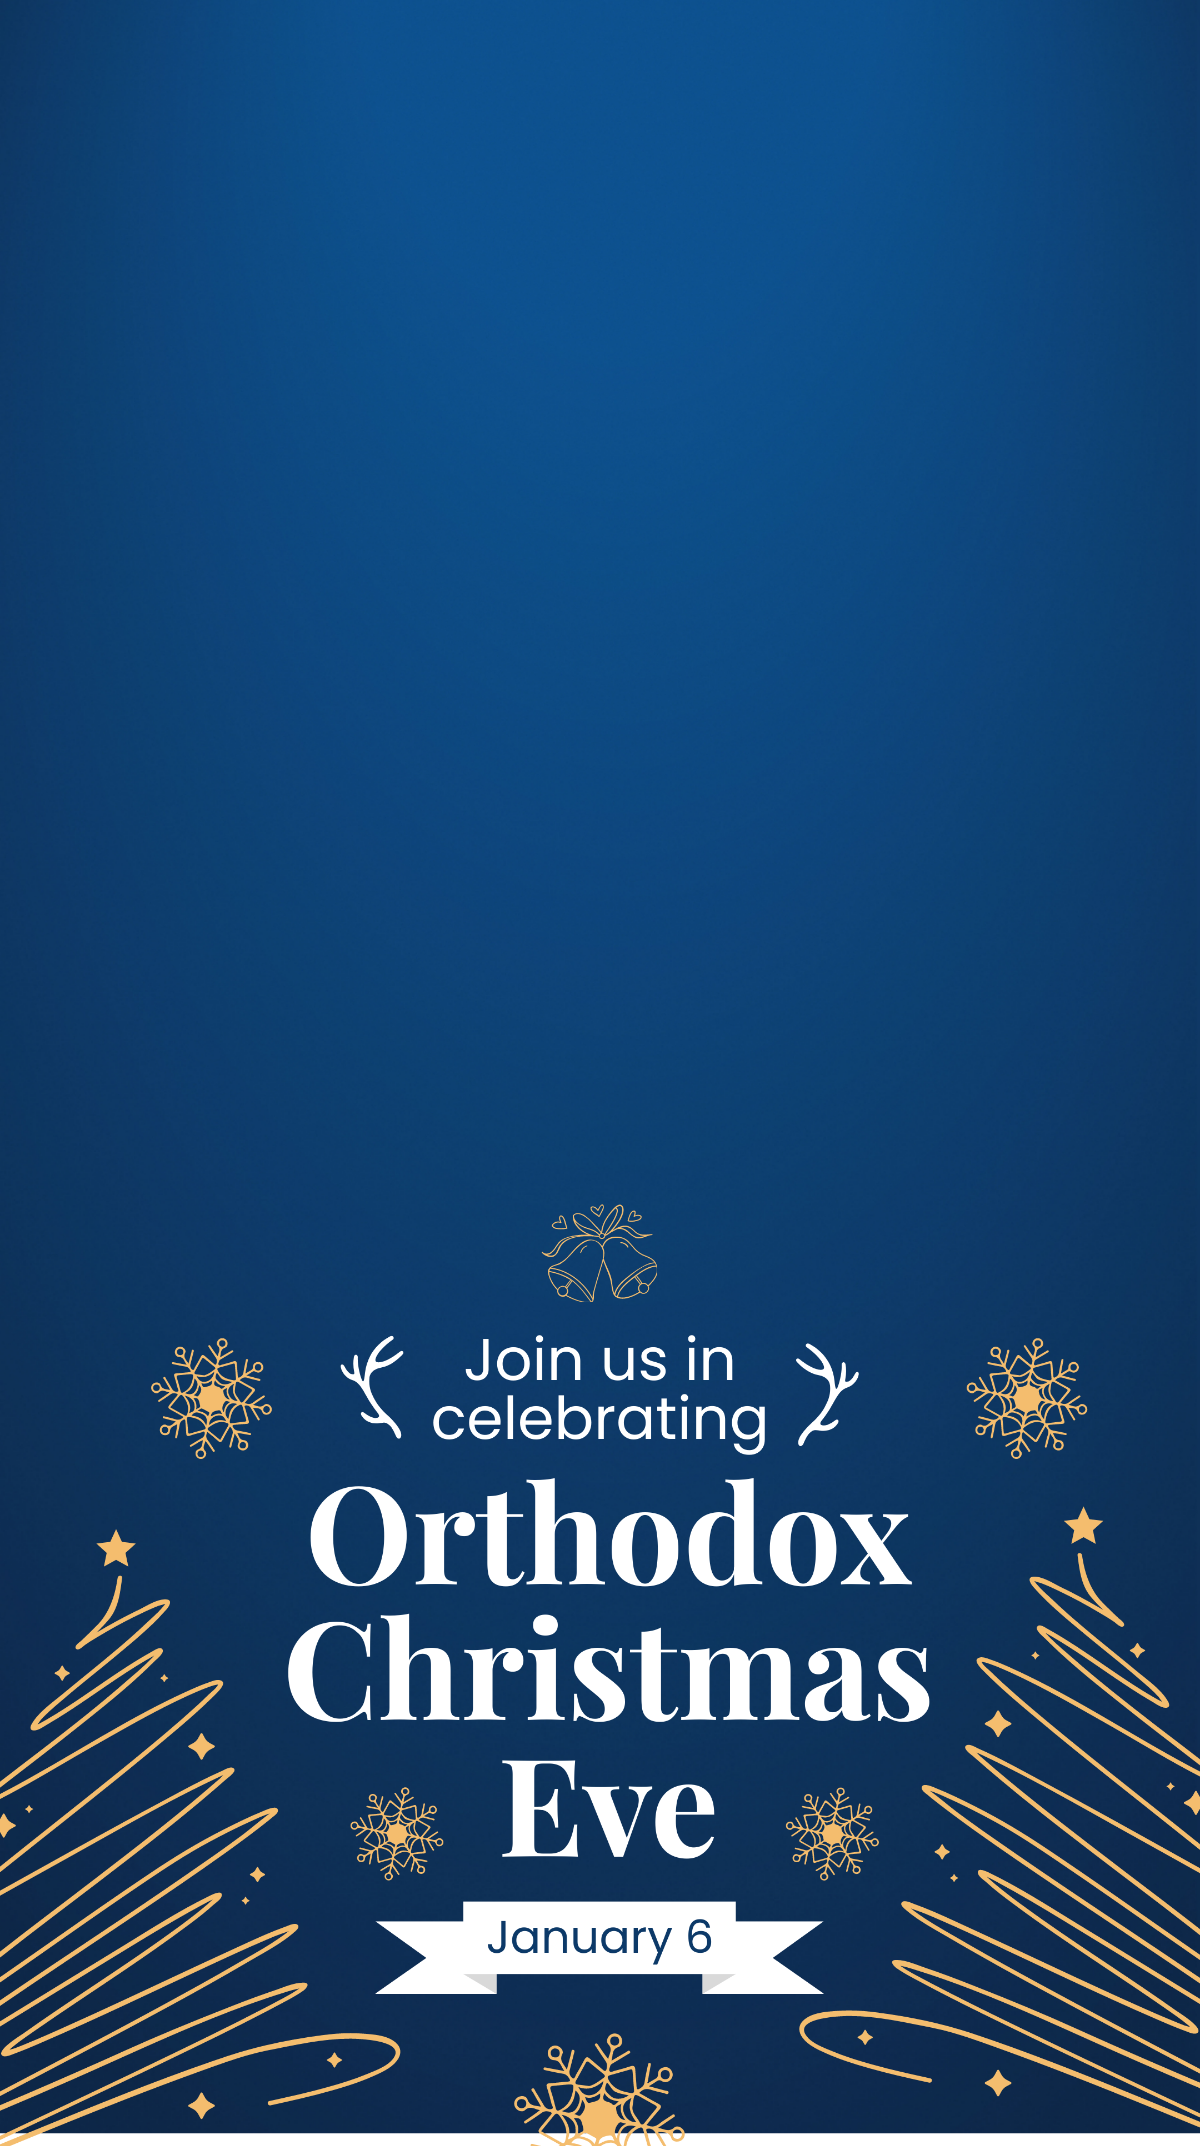 Orthodox Christmas Eve Snapchat Geofilter Template